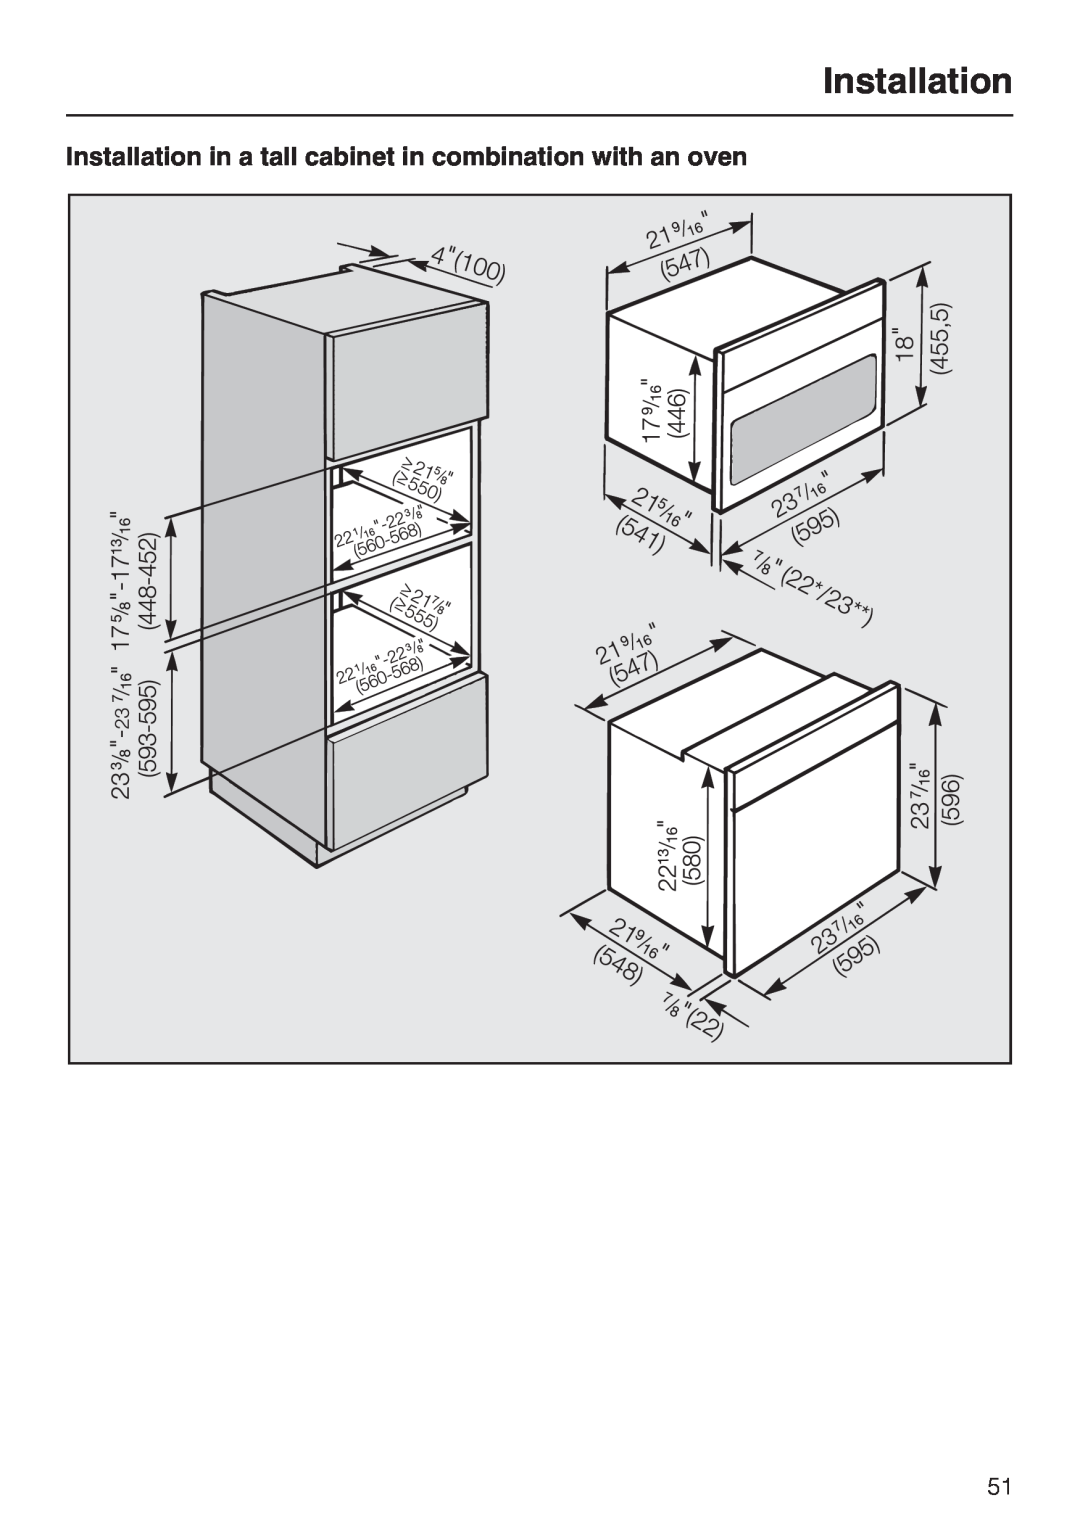 Miele H 4042 BM installation instructions Installation in a tall cabinet in combination with an oven 